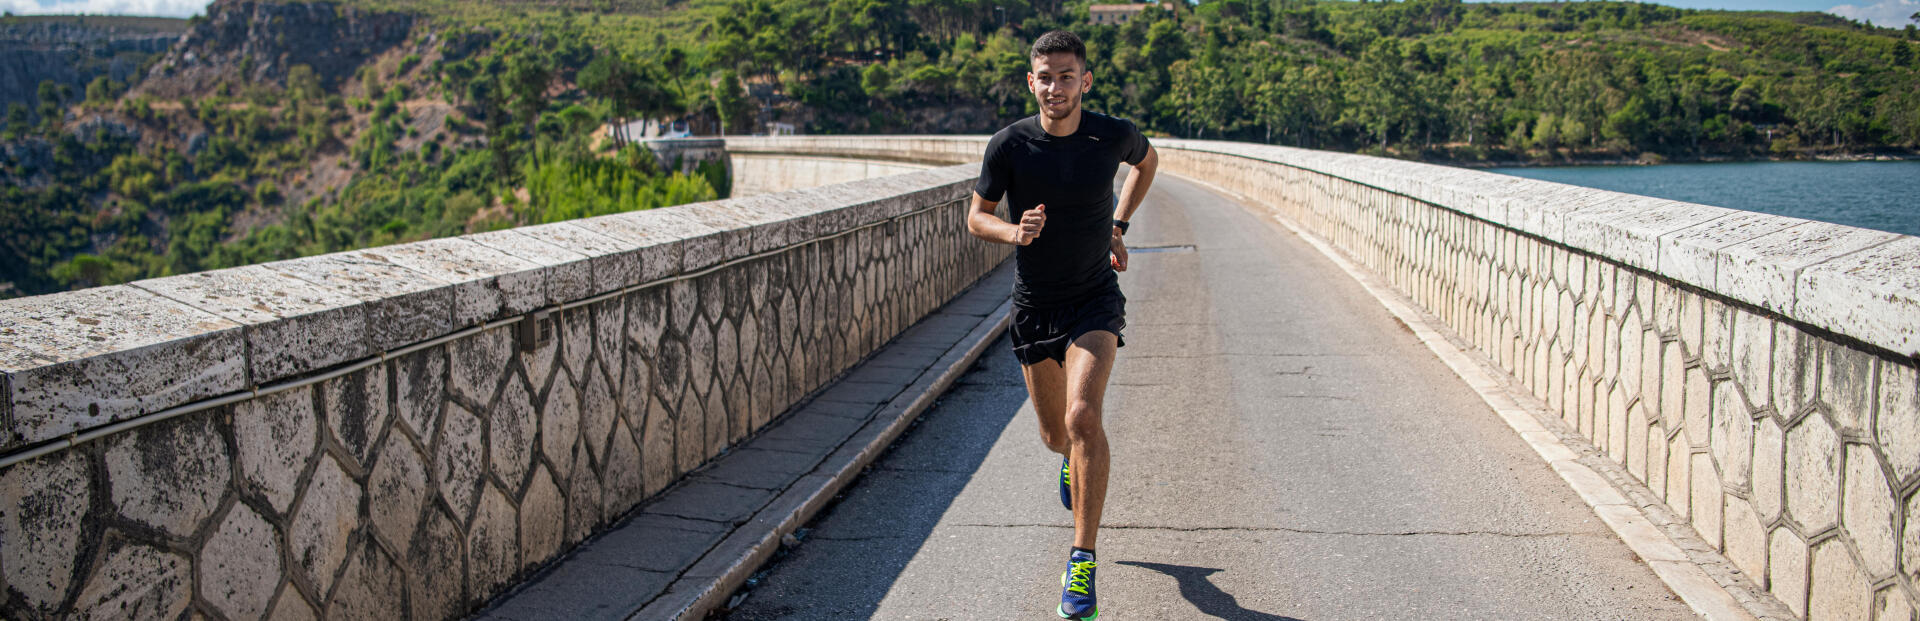 Is your running posture correct? Here’s a guide to proper running form.